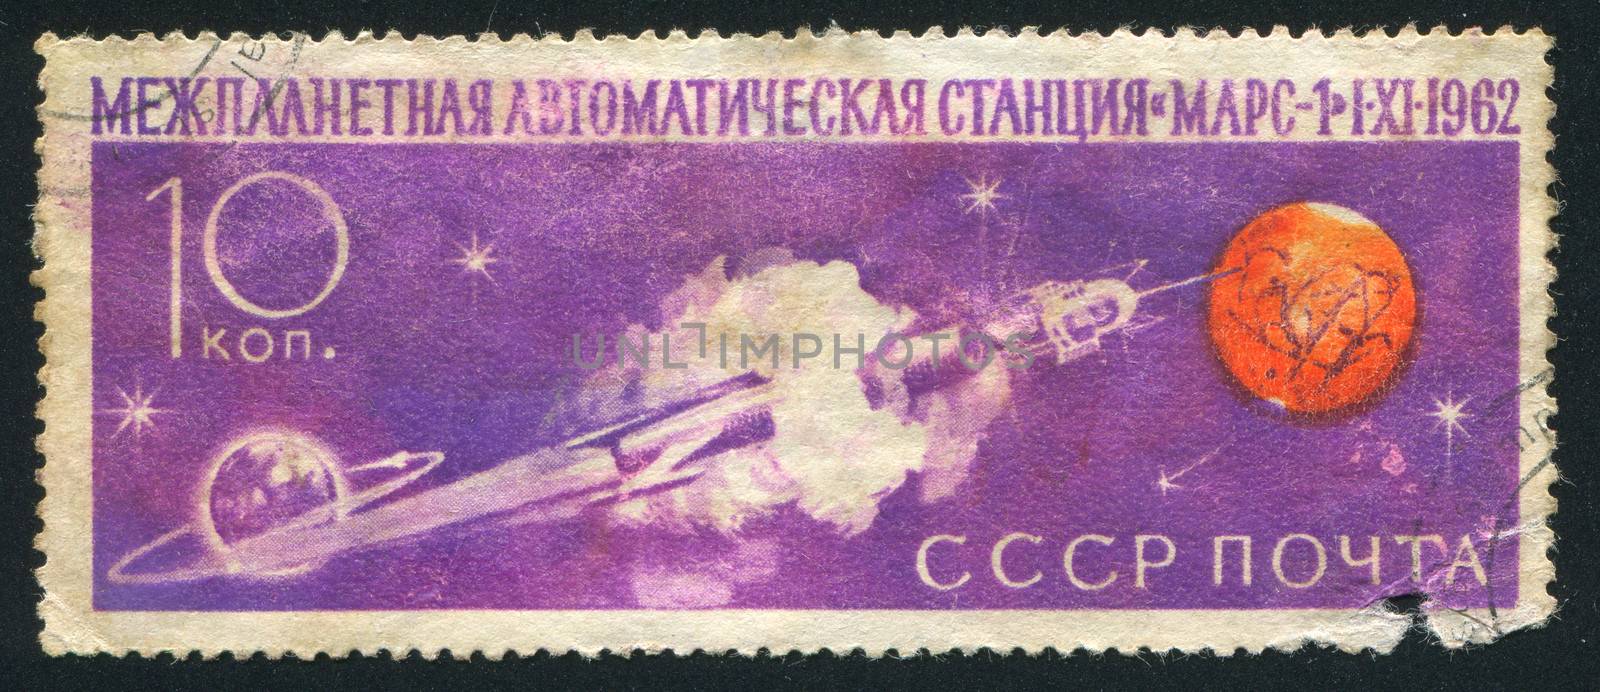 RUSSIA - CIRCA 1962: stamp printed by Russia, shows Space Rocket, Earth and Mars, circa 1962